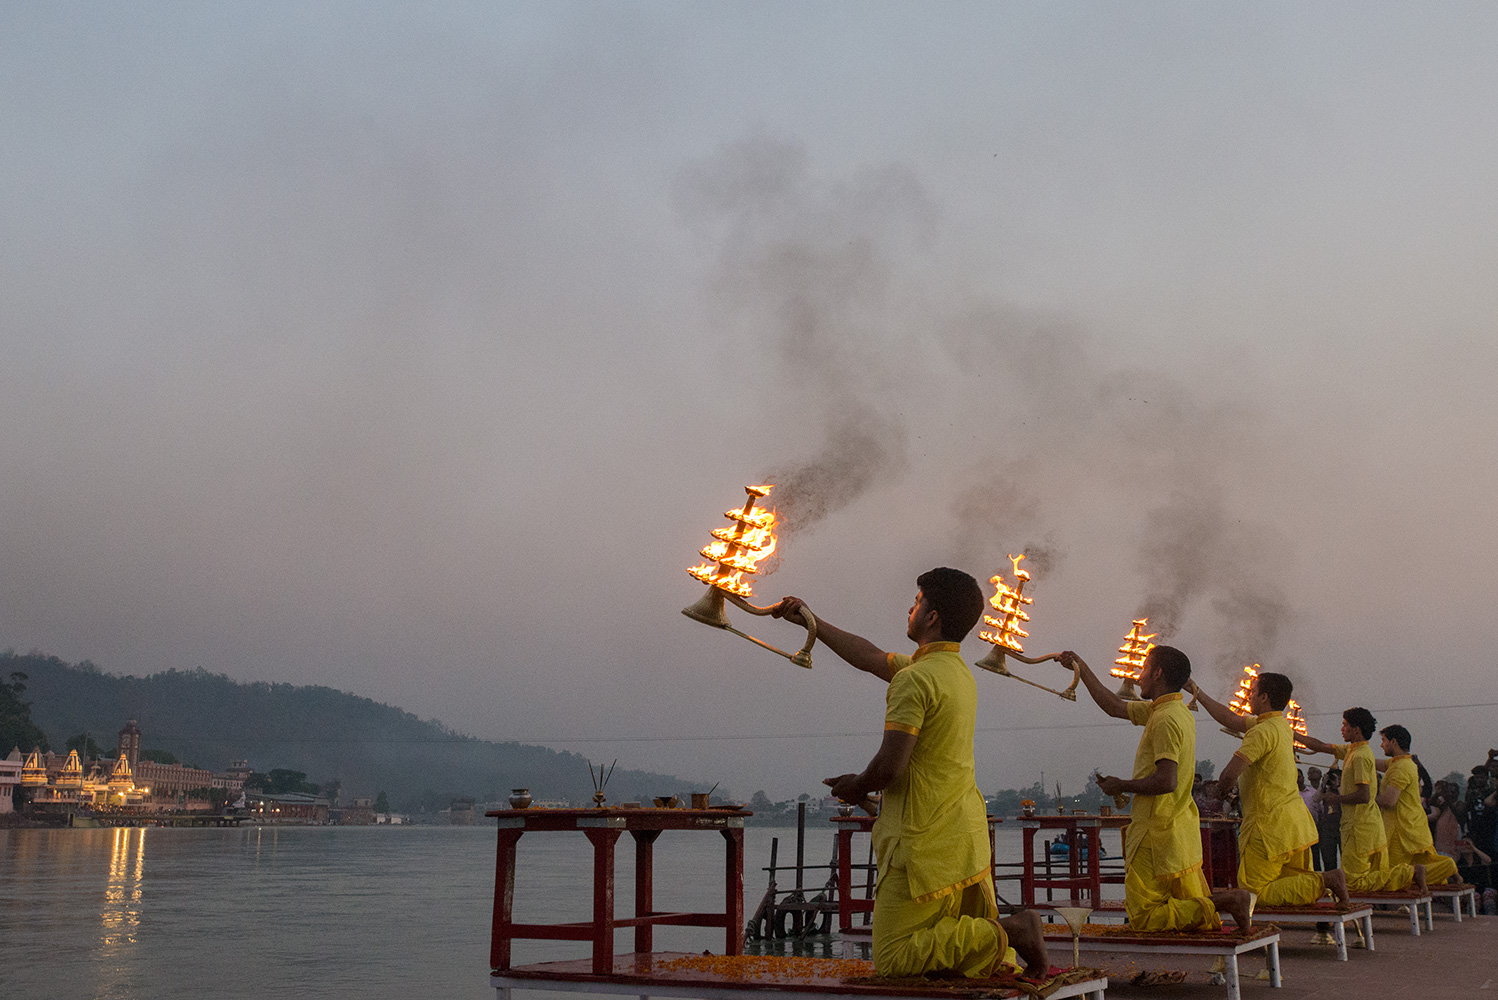 On the opposite bank of the Ganga from the Parmanth Niketan Ashram, this more relaxed and informal aarti ceremony takes place